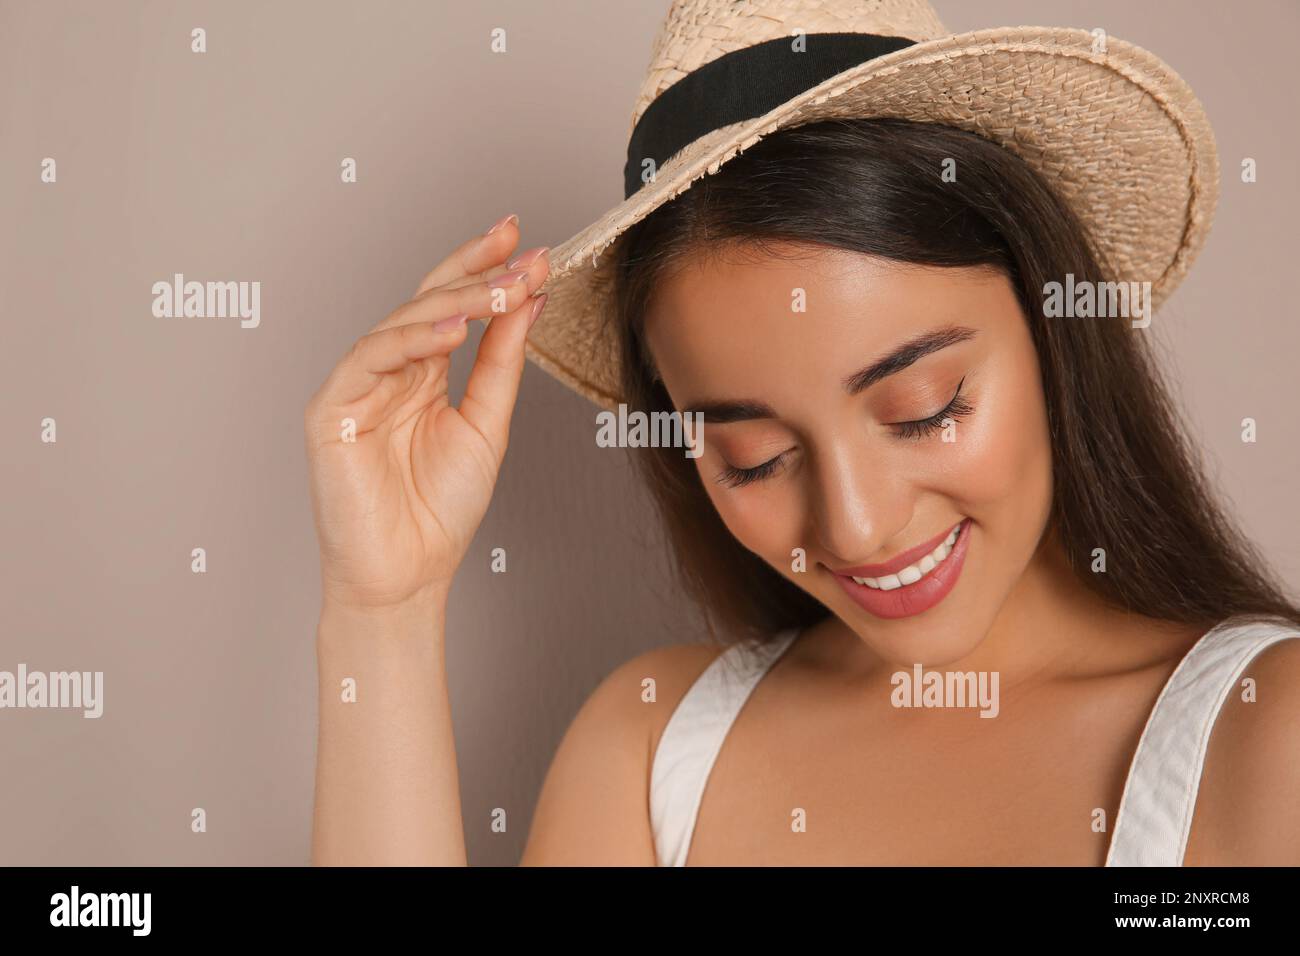 Pretty Girl with Staw Hat, Bra and Shorts Touches the Hat Stock Image -  Image of lady, beautiful: 29799245